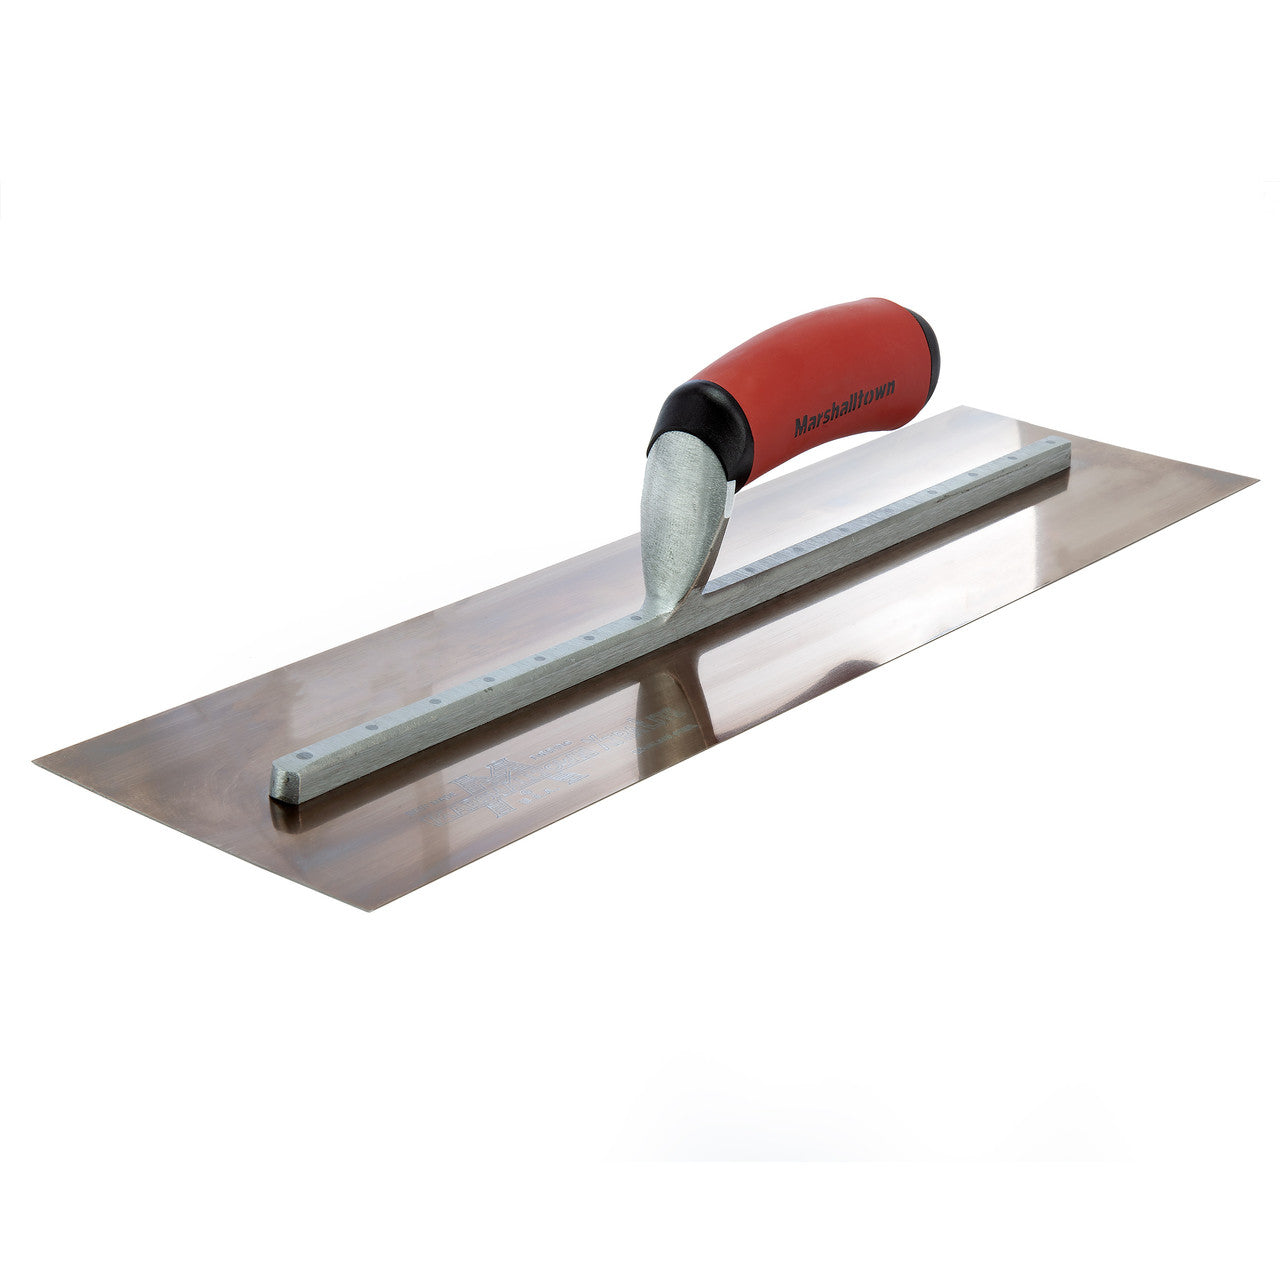 Marshalltown MXS815GD Gold Stainless Steel Finishing Trowel 18 x 5in